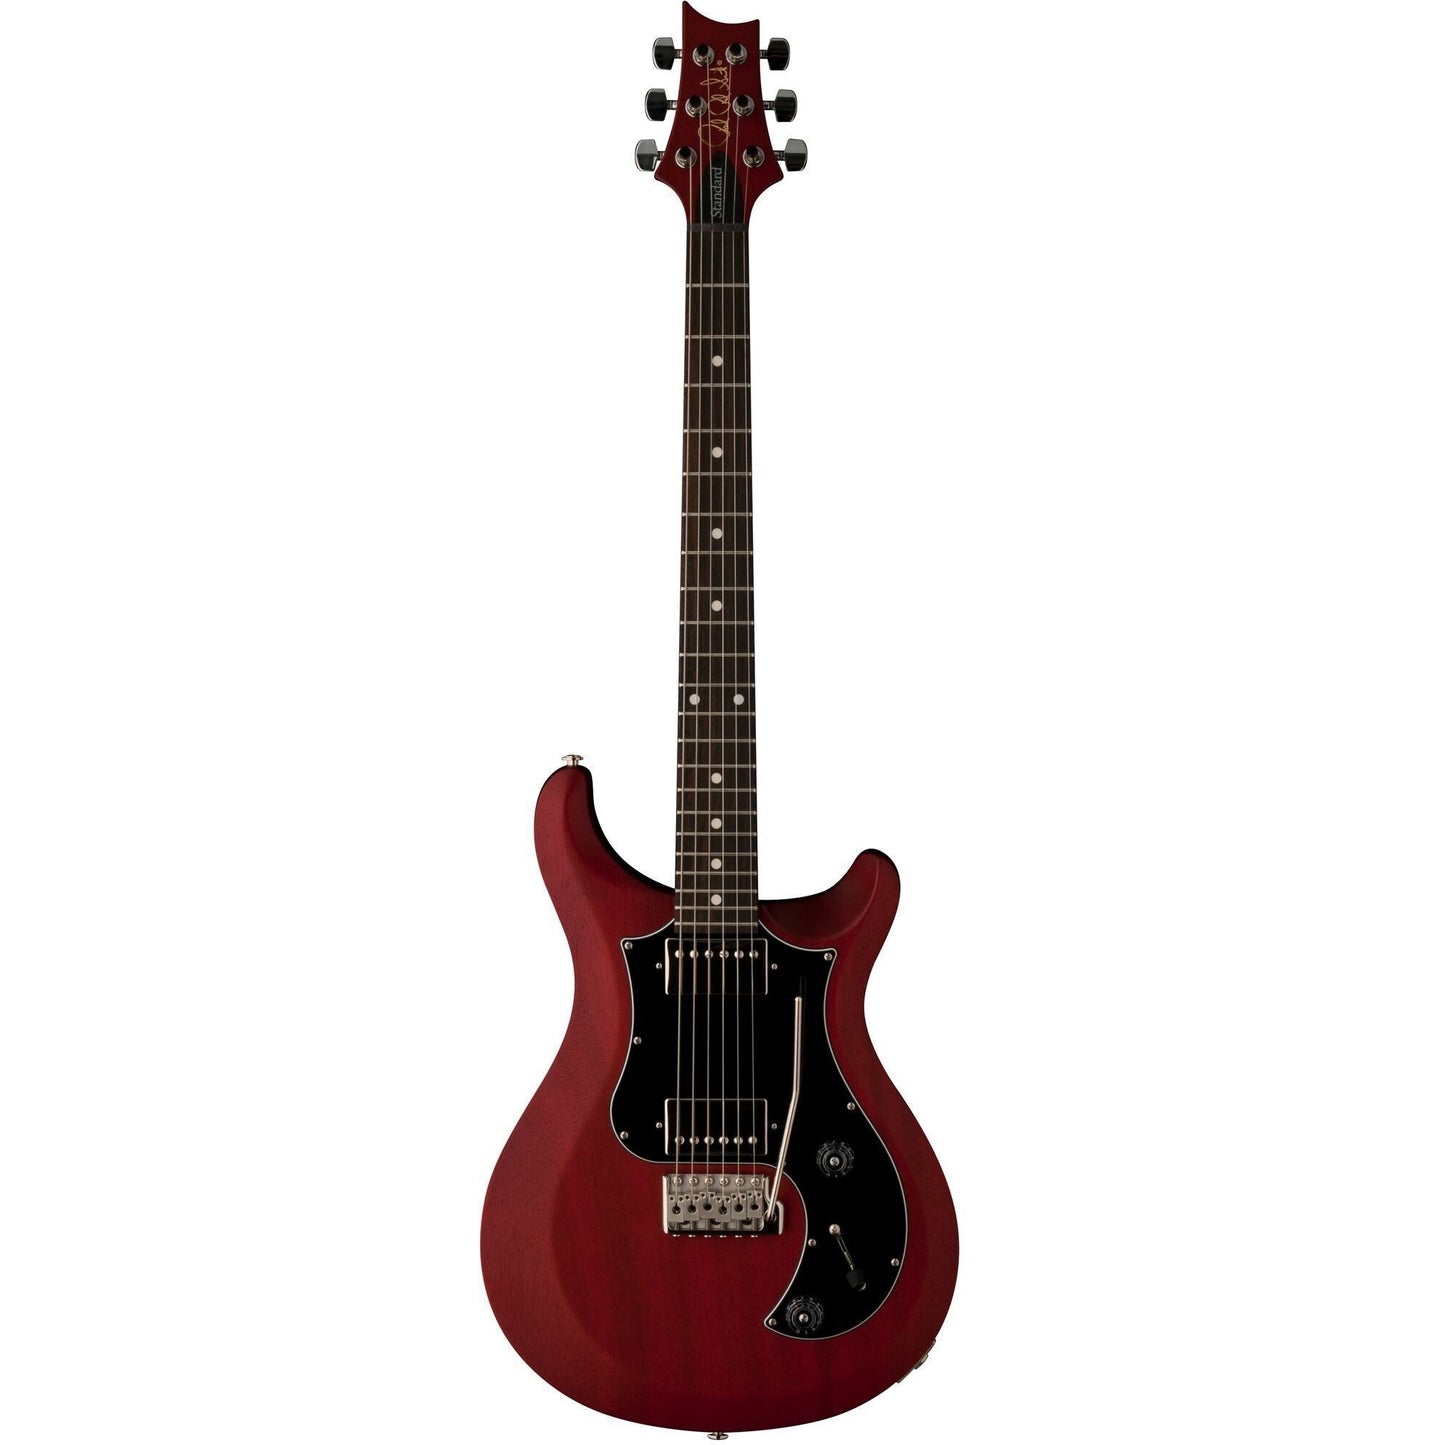 PRS Paul Reed Smith 2019 S2 Satin Standard 22 Electric Guitar (with Gig Bag), Vintage Cherry